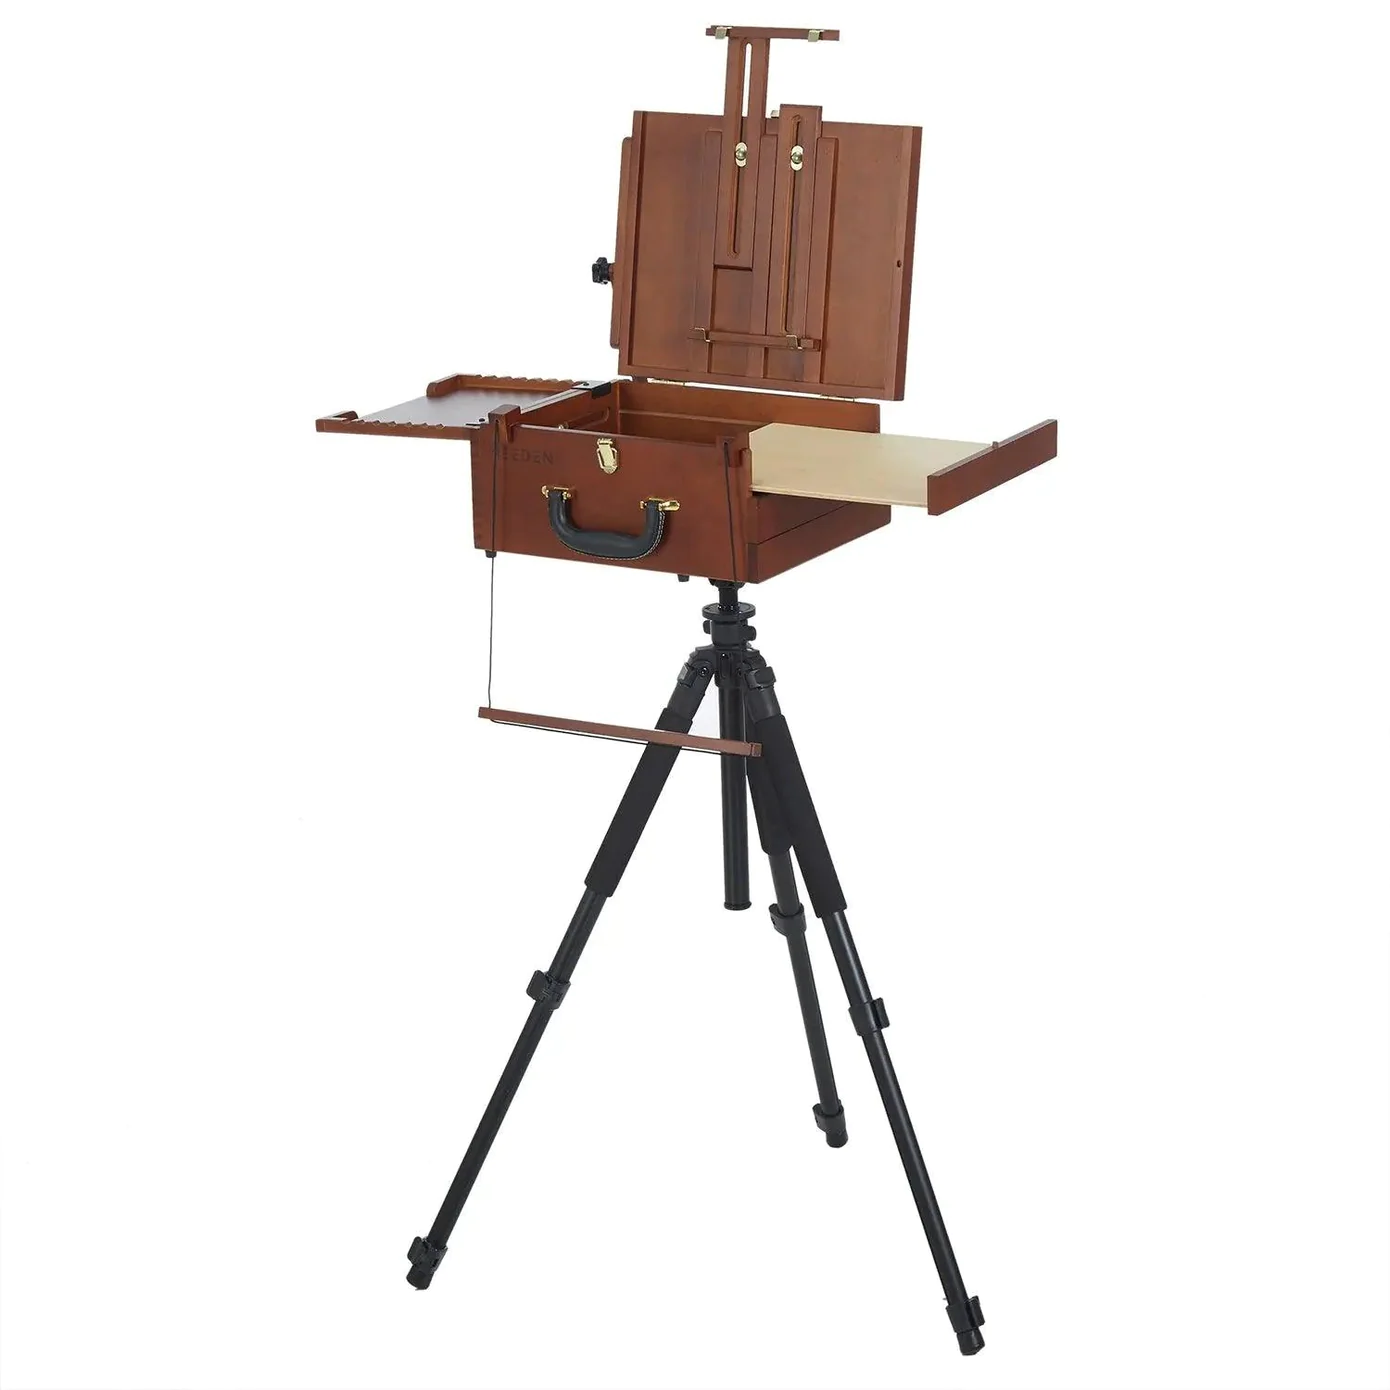 Lite Box Painting Easel (Introductory Offer). Doesn't include tripod or